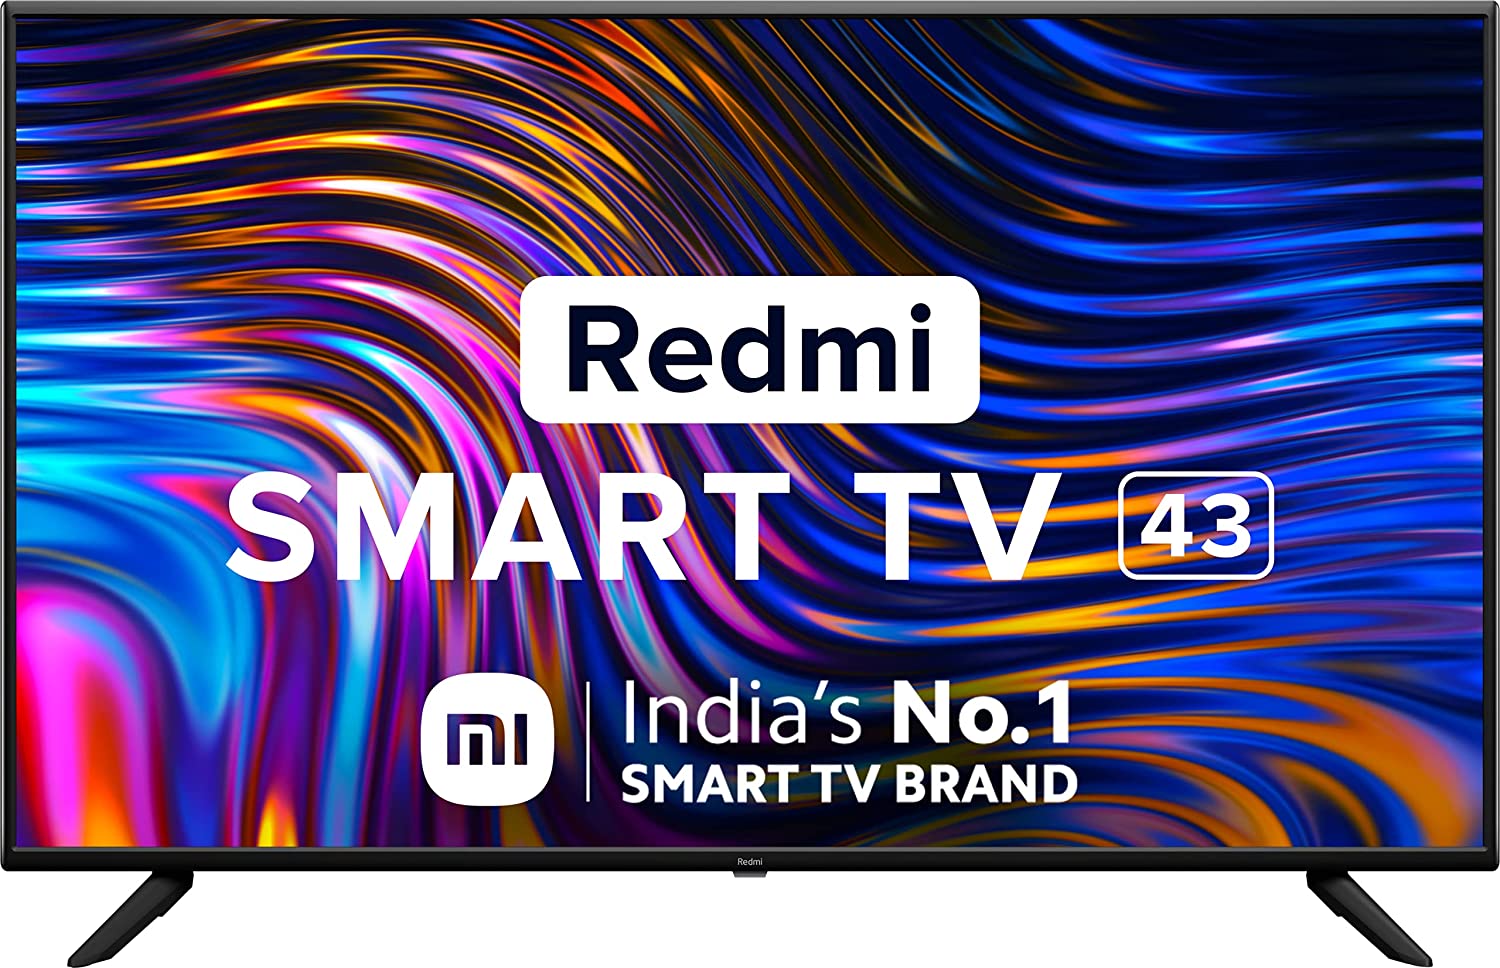 REDMI SMART TV 43" Full HD Smart LED TV With Android 11